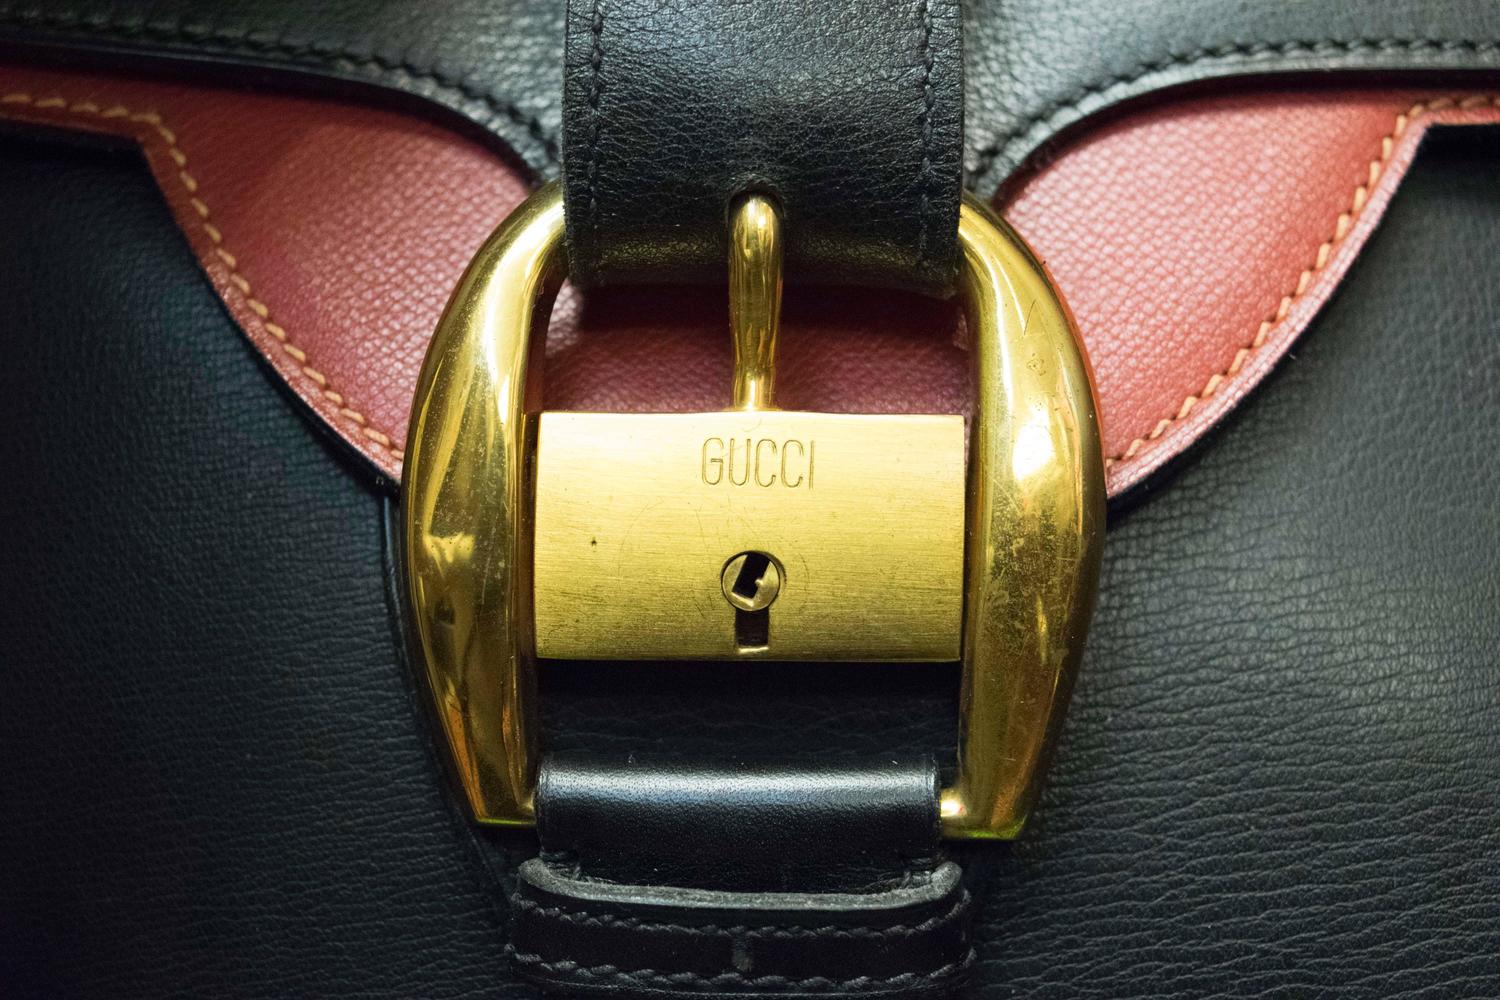 1950s Gucci Black and Red Leather Handbag For Sale at 1stdibs